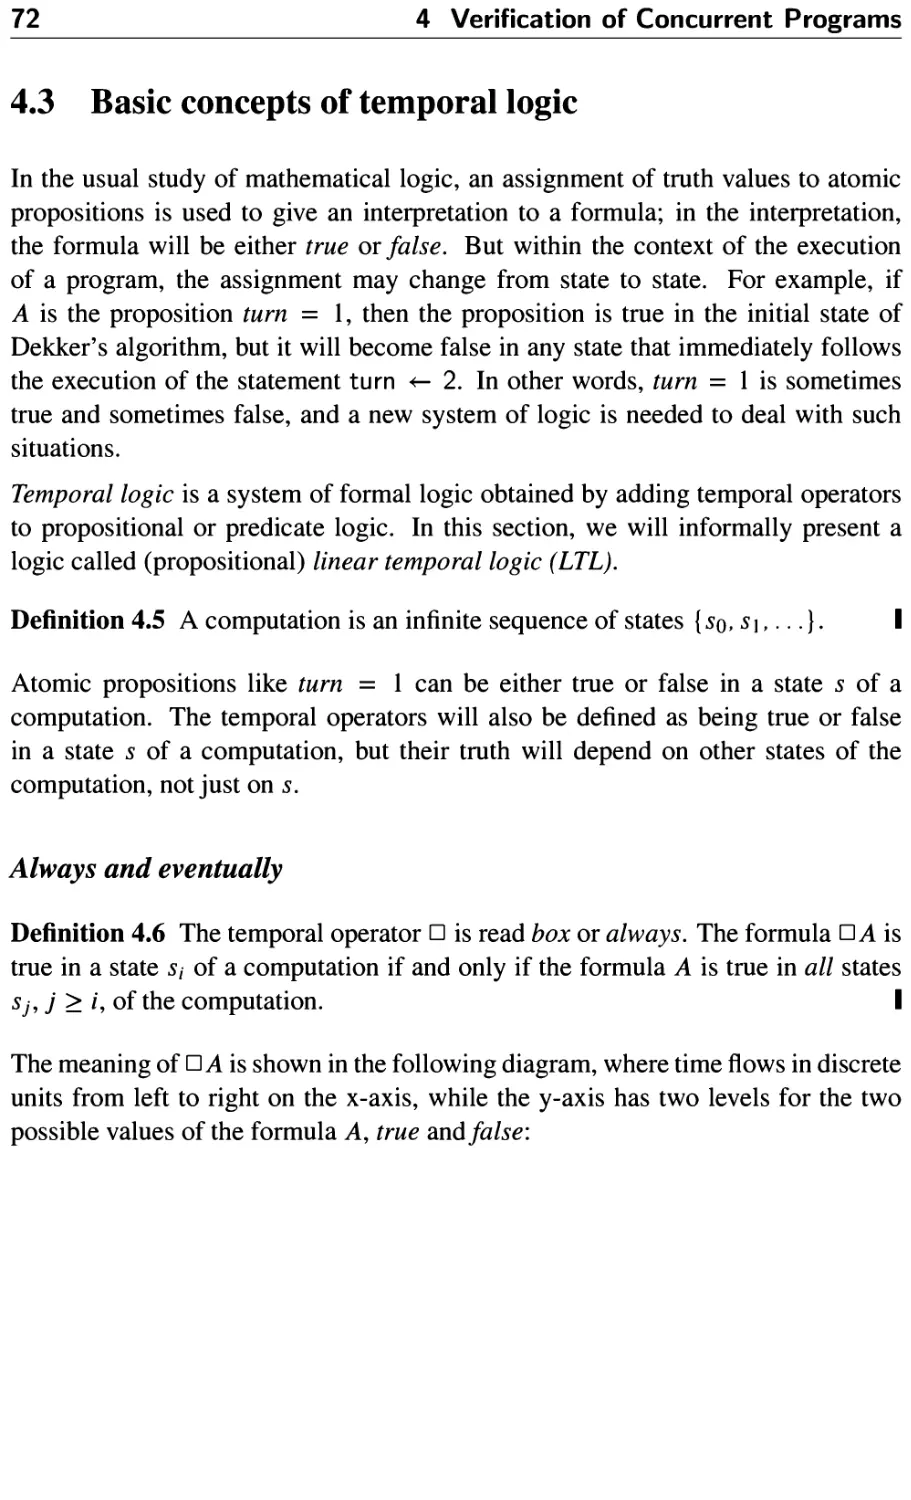 4.3 Basic concepts of temporal logic